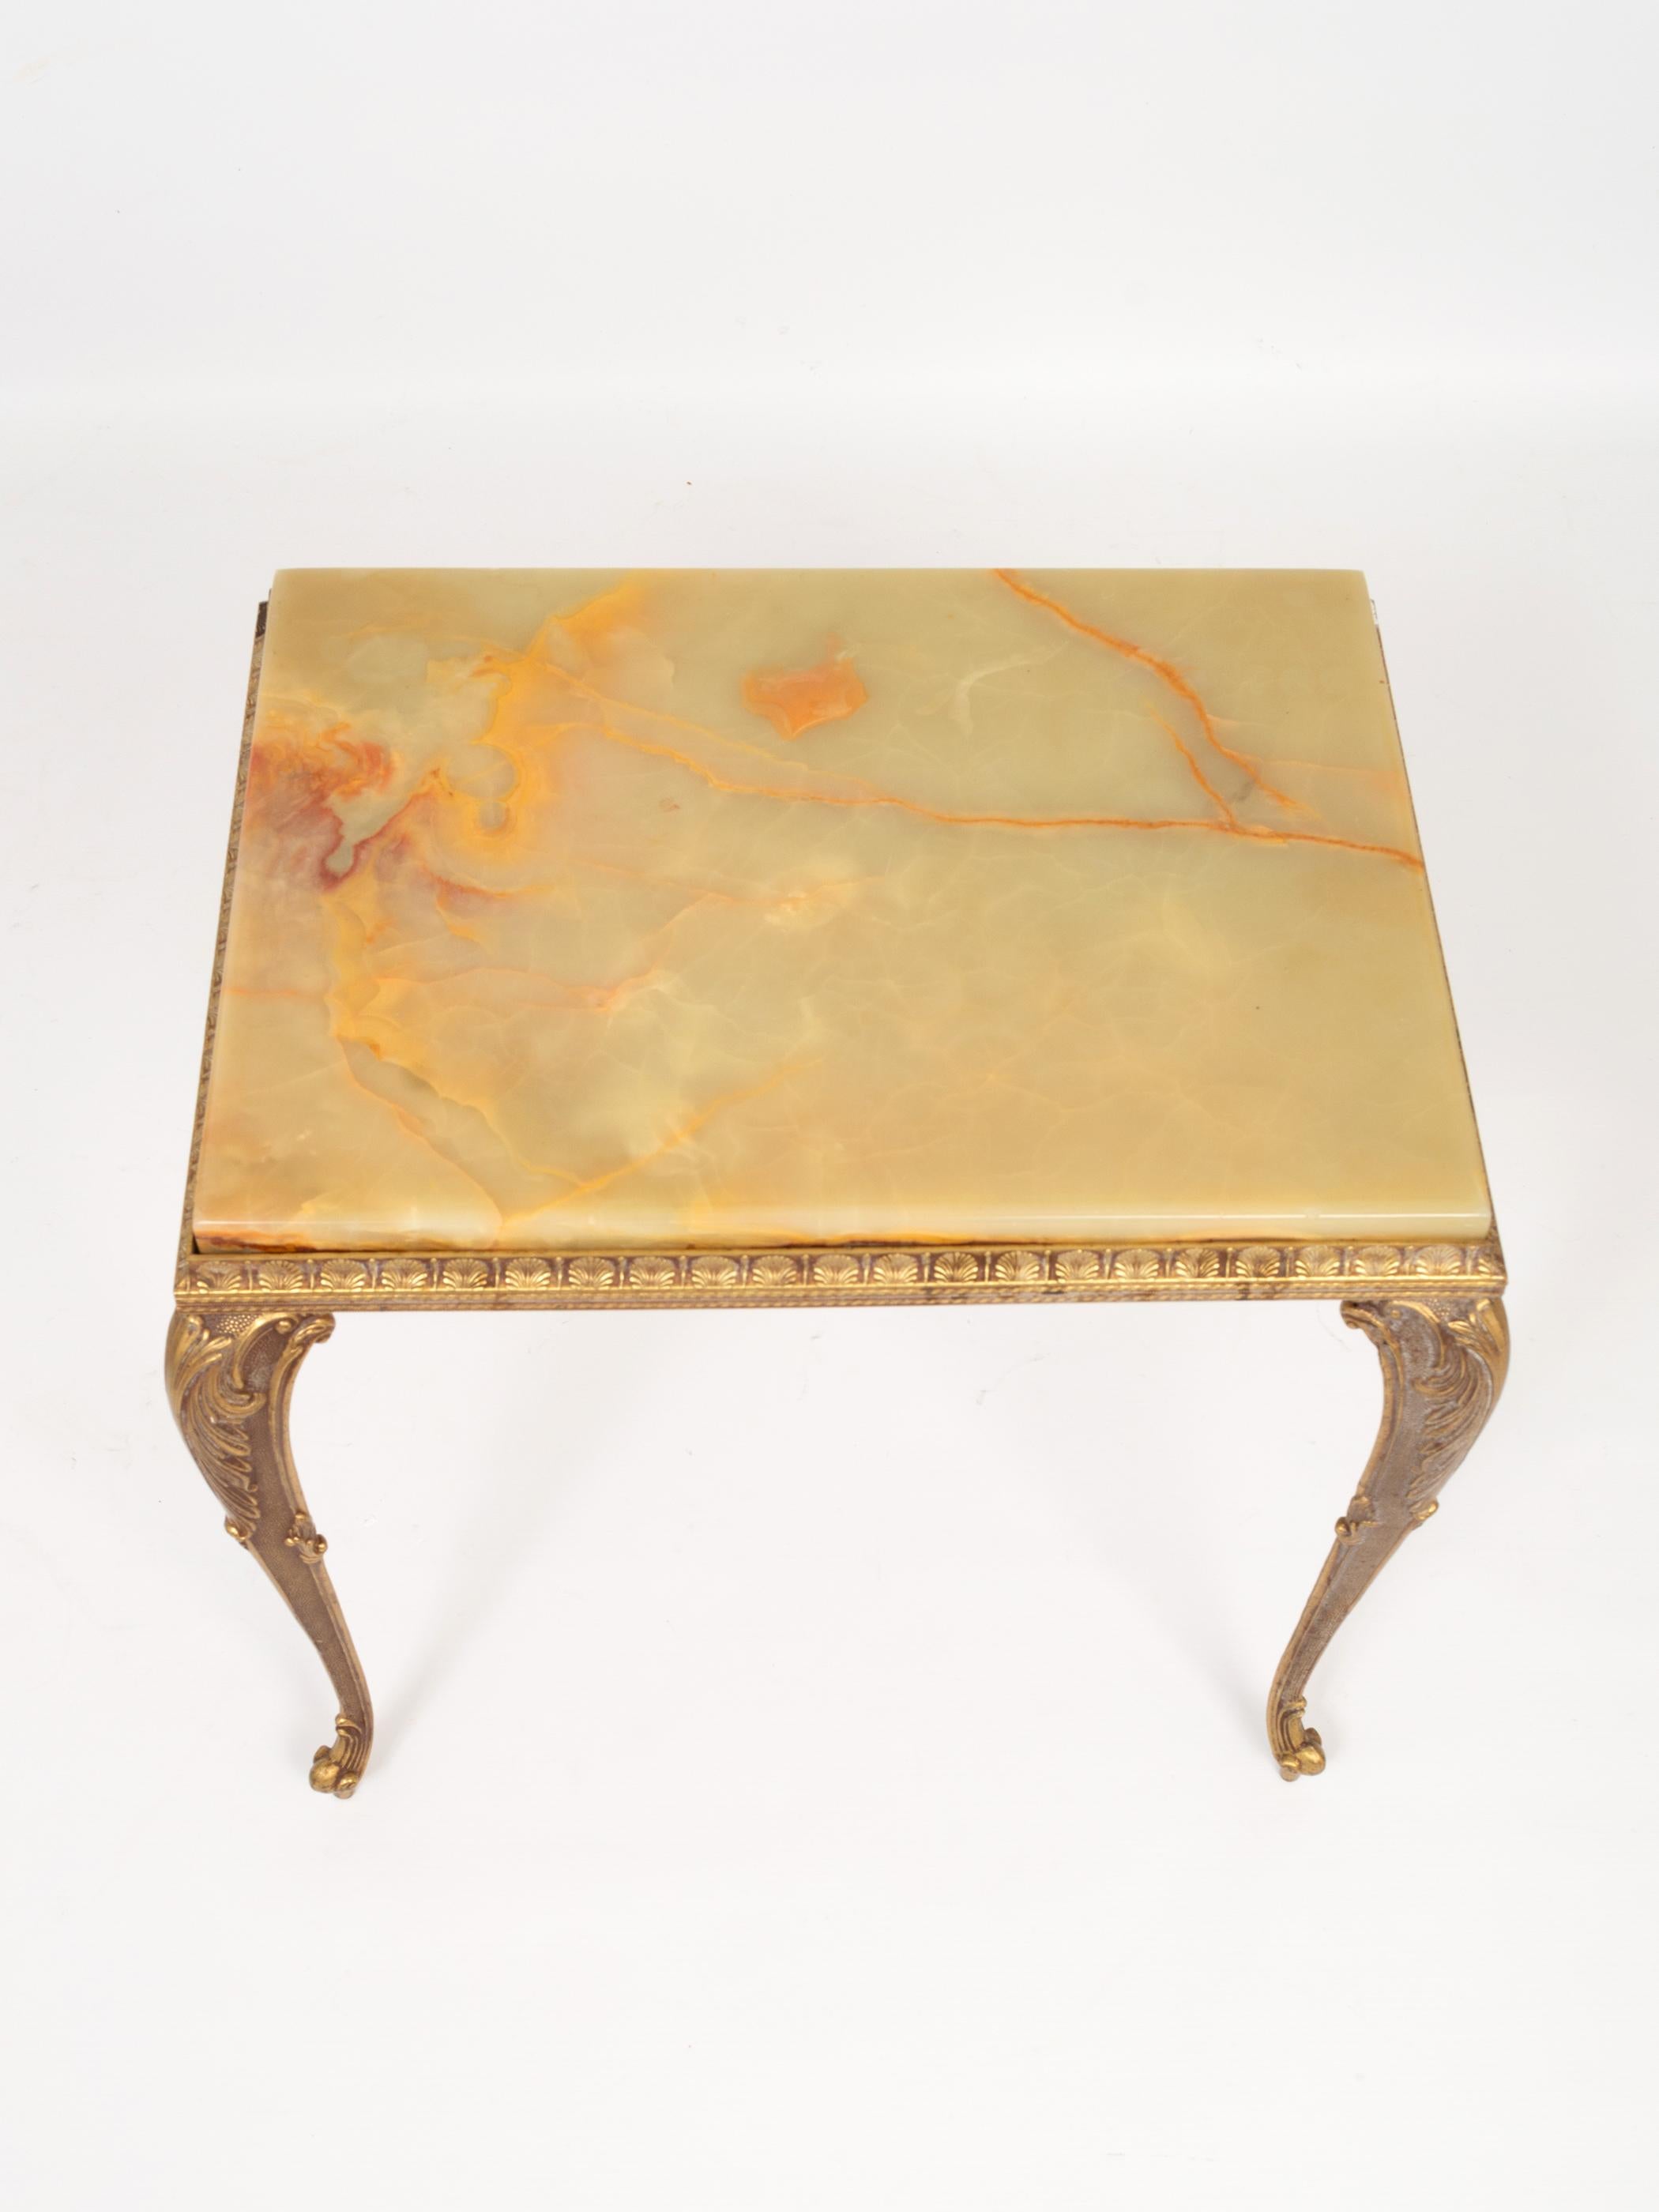 Pair French Gilt Brass and Onyx Side Lamp Tables, c.1940 For Sale 2